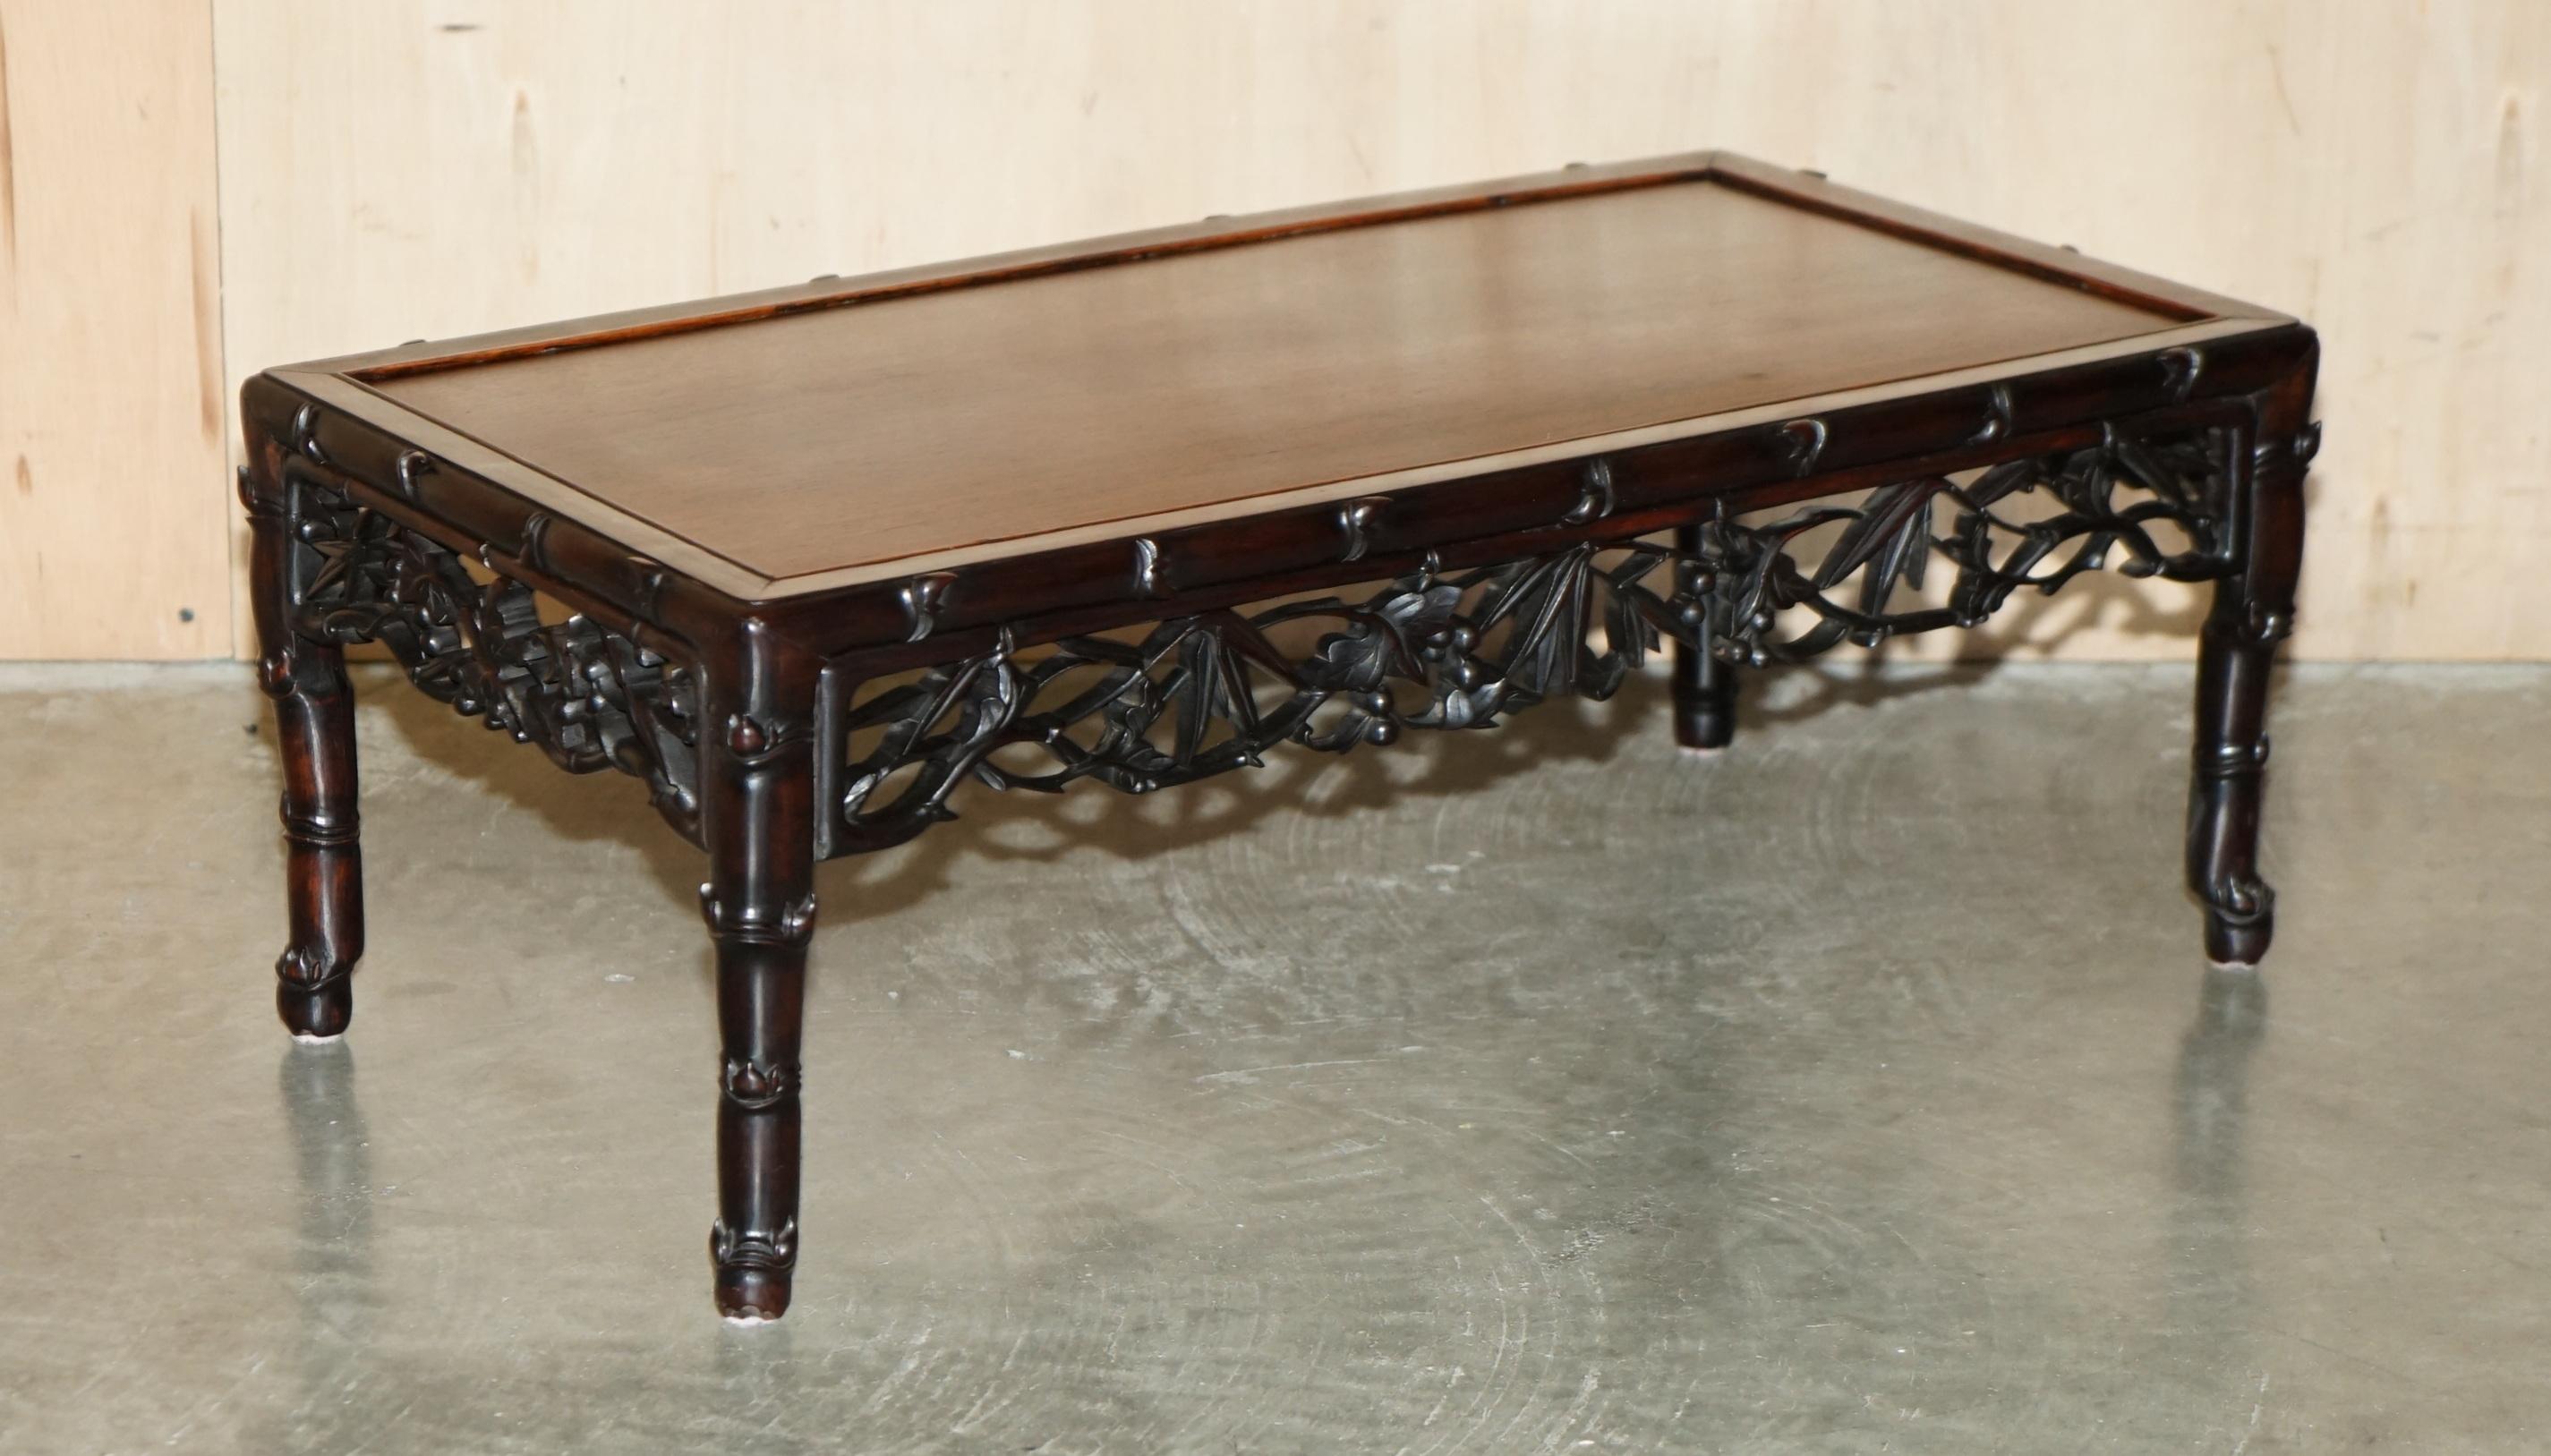 Royal House Antiques

Royal House Antiques is delighted to offer for sale this lovely ornately carved Antique Circa 1880 Oriental Chinese Opium low tea Padouk table

Please note the delivery fee listed is just a guide, it covers within the M25 only